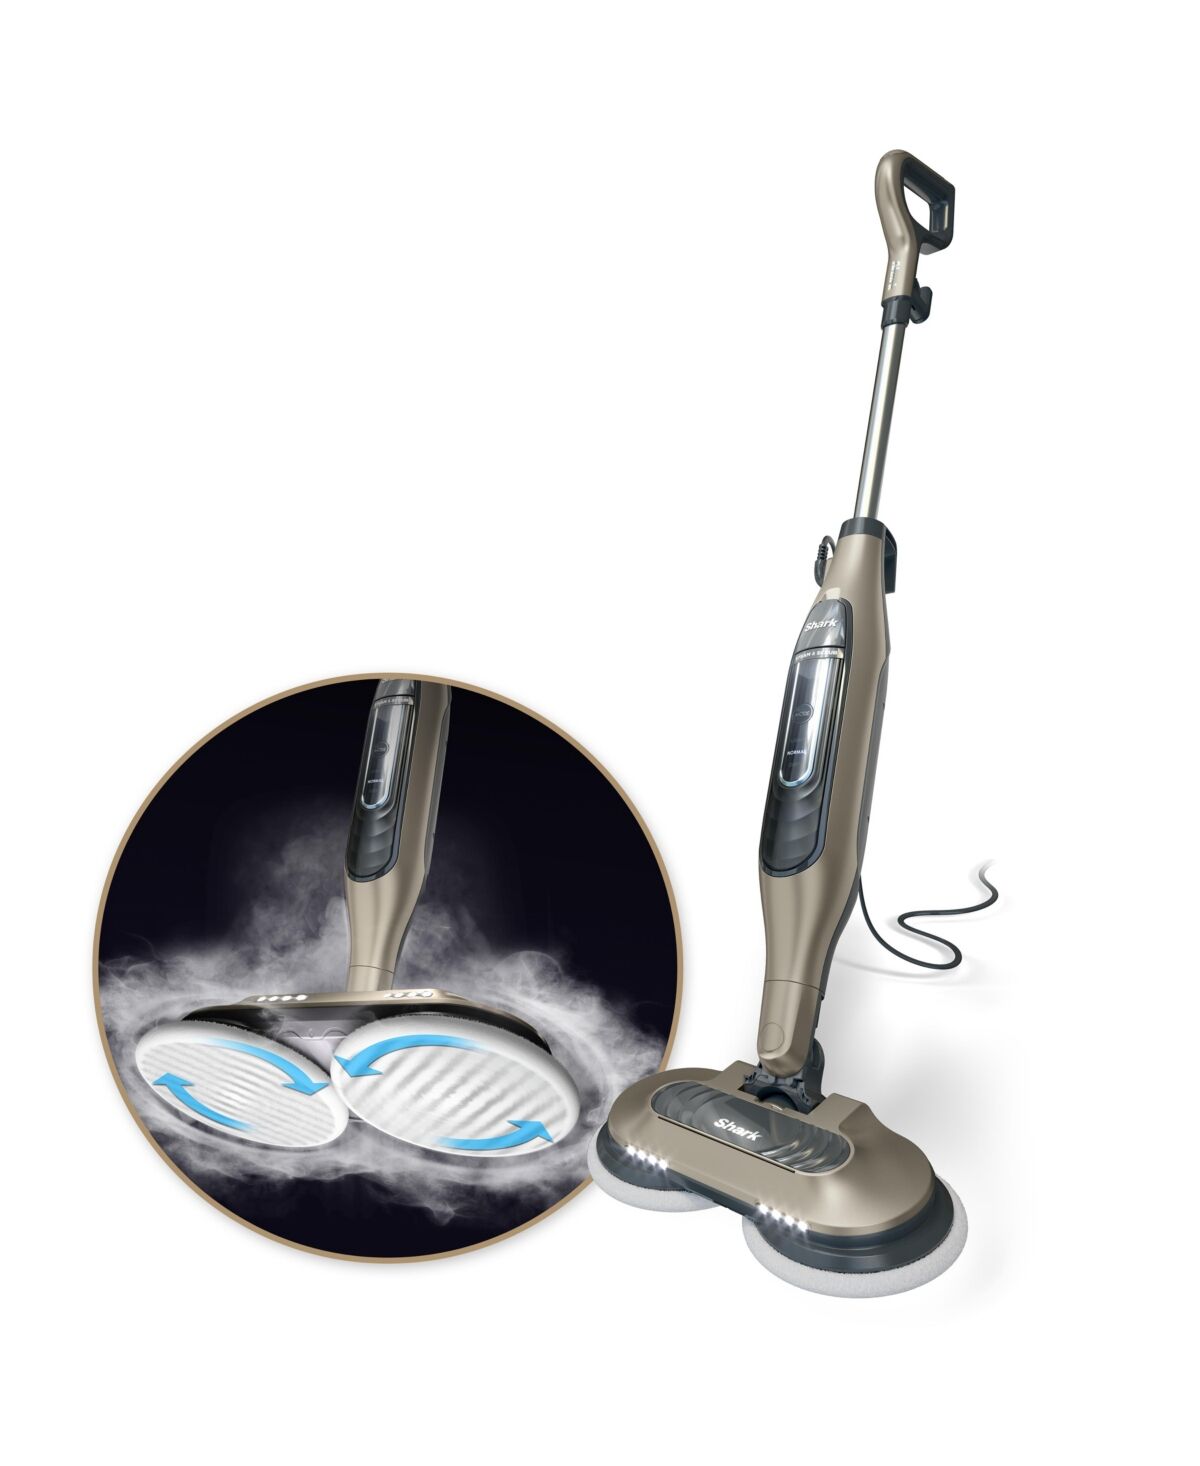 Shark Steam & Scrub All-in-One Scrubbing and Sanitizing Hard Floor Steam Mop S7001 - Taupe